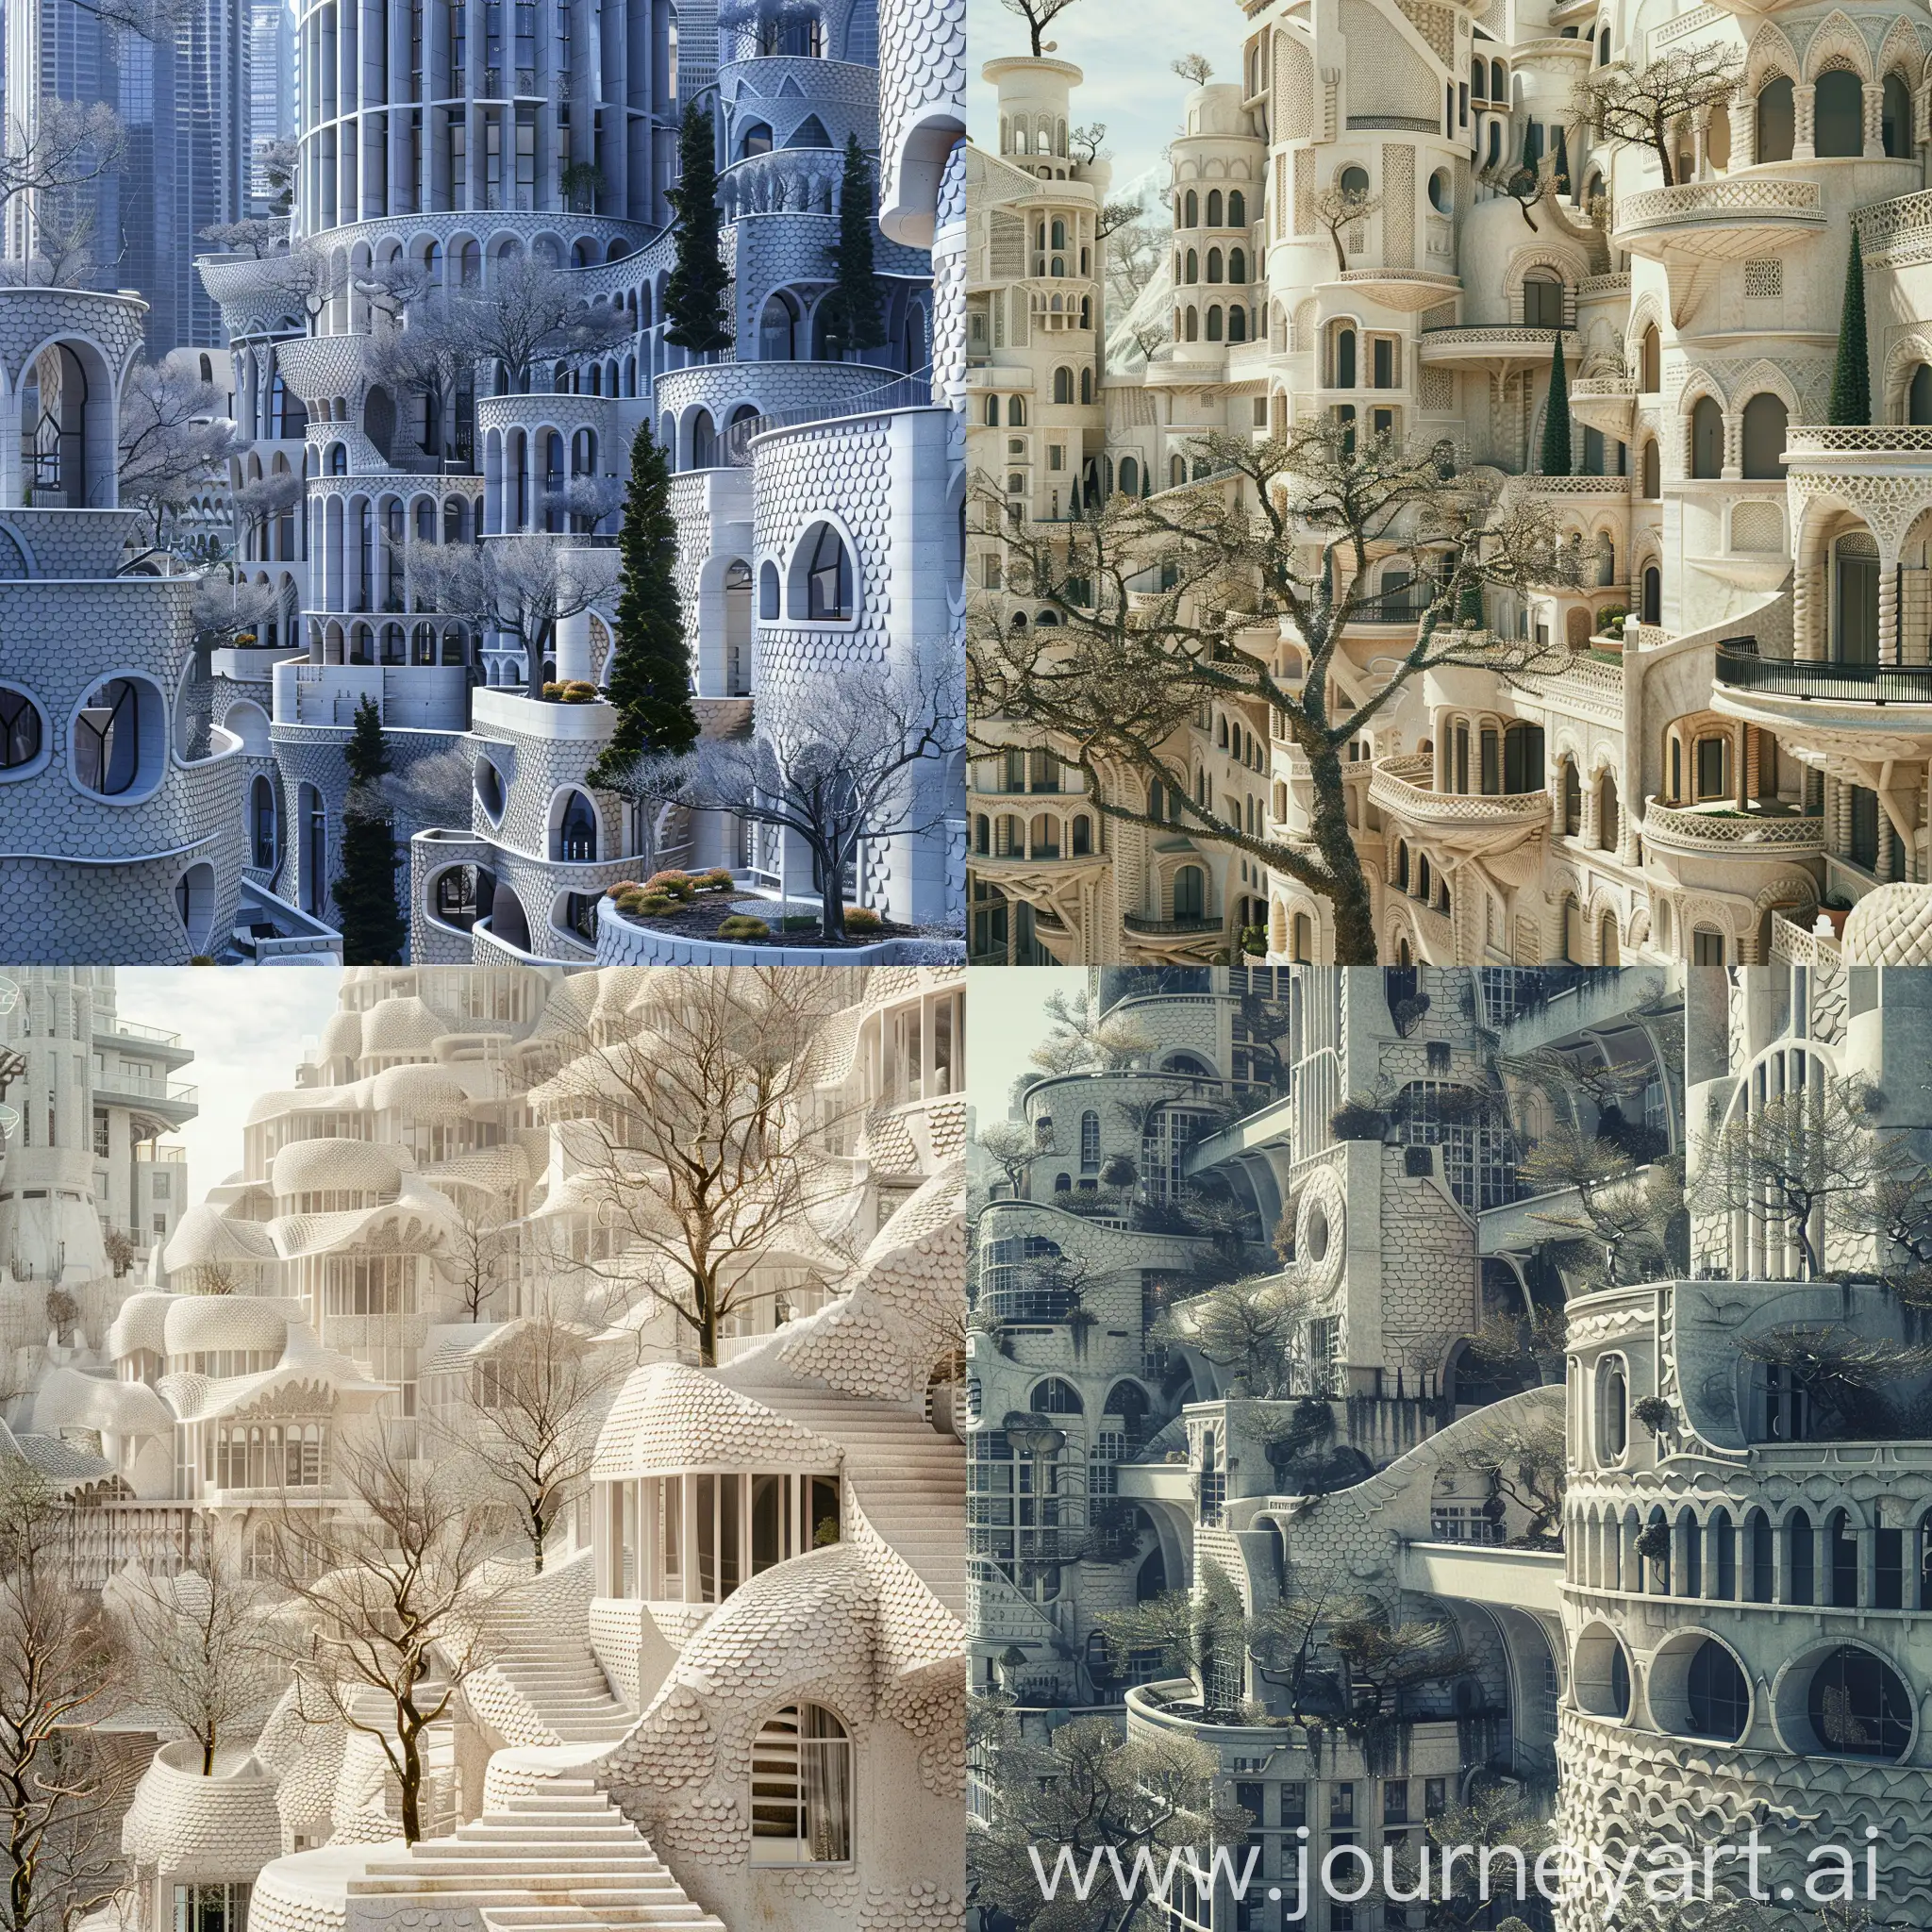 Beautiful futuristic metropolis in an alternate timeline where all buildings retain traditional elements, ornate travertine architecture with scale-like patterns on facades and leafless trees, terraced buildings, Pacific Northwest climate, photograph